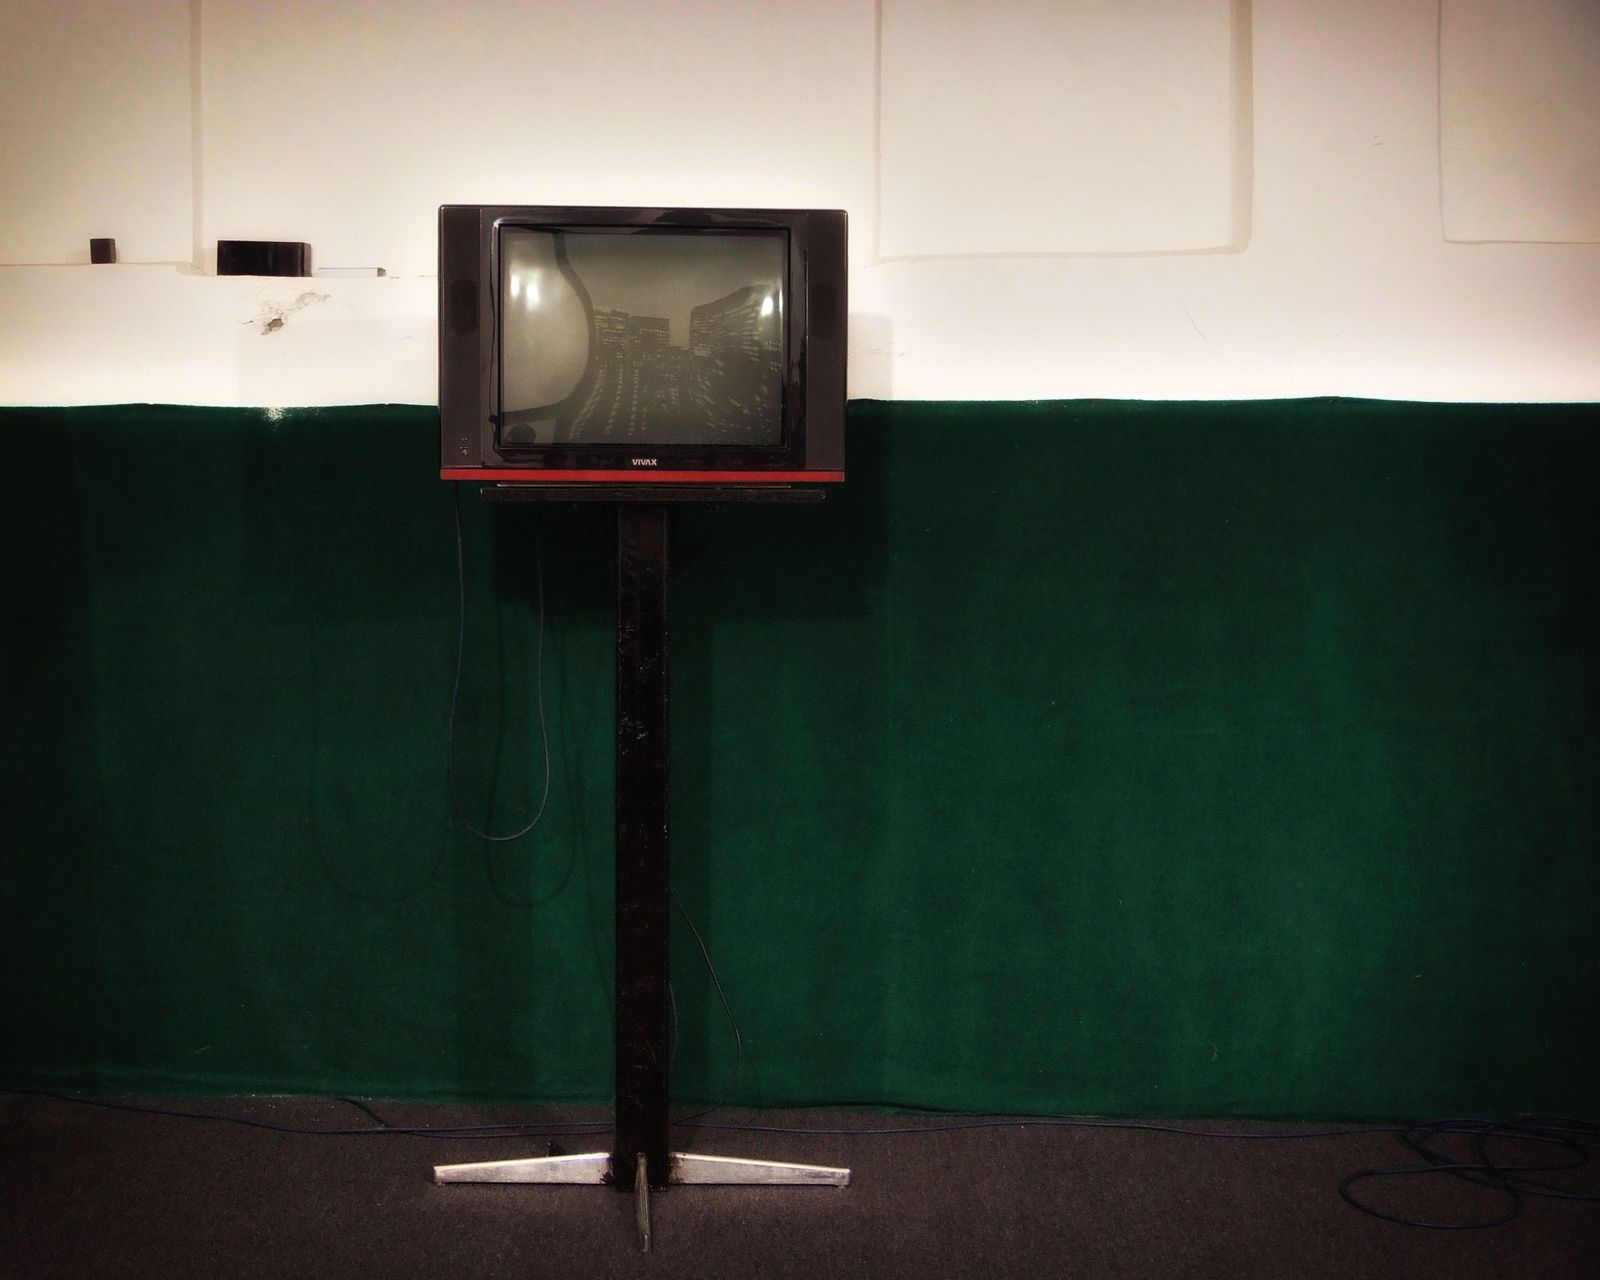 © Davide Palmisano - an old television set, probably does not work